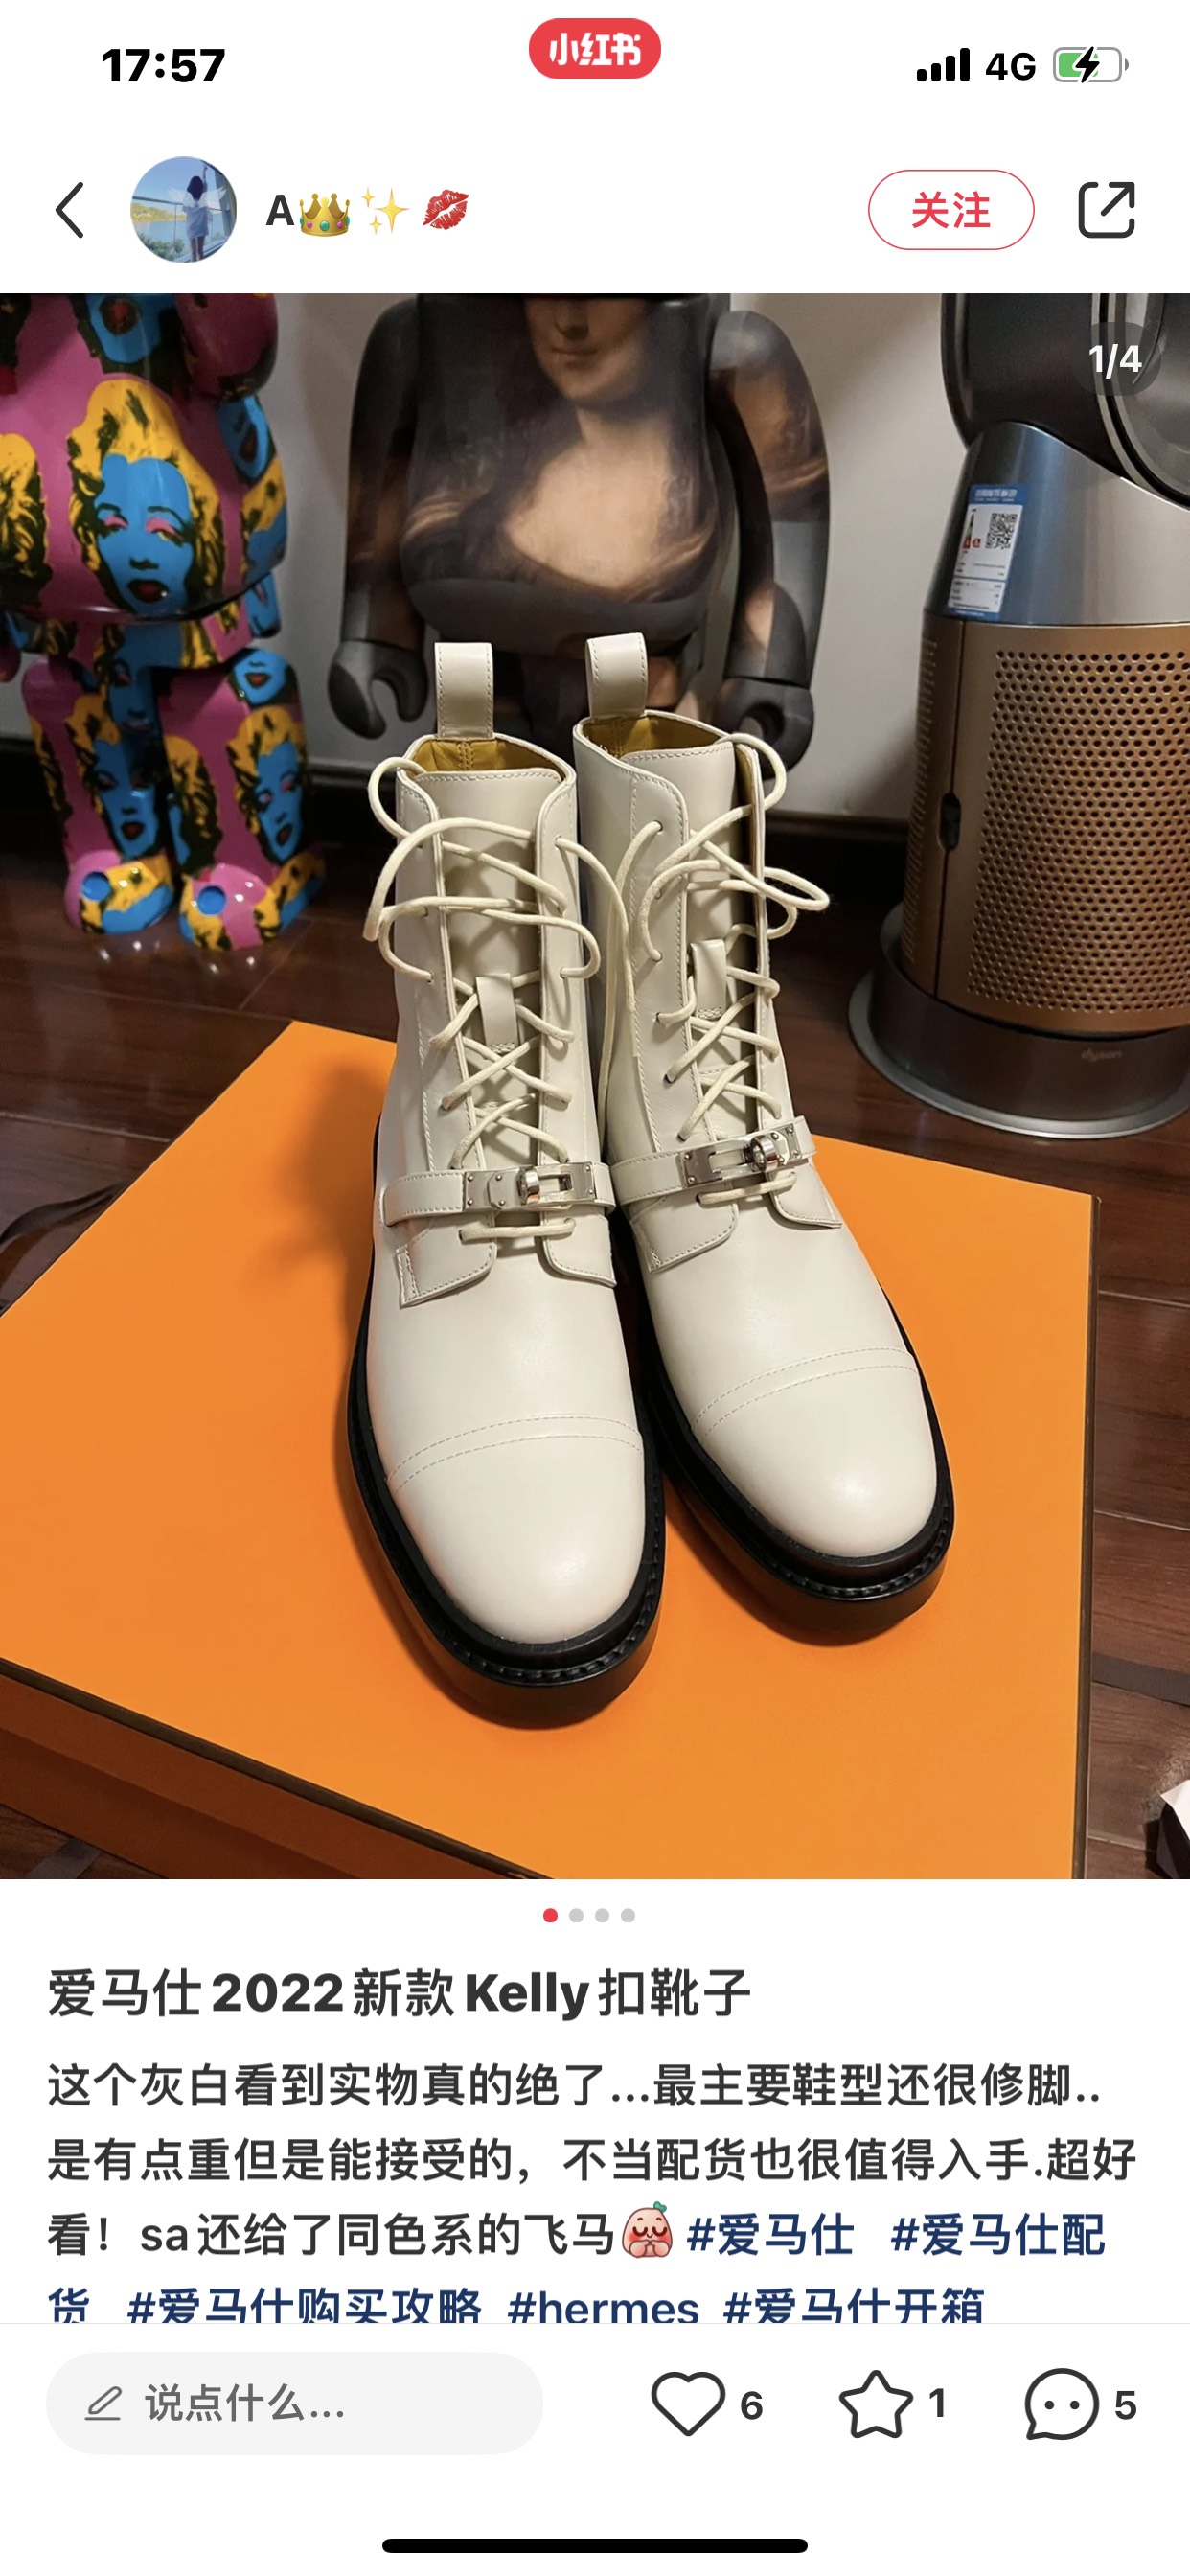 Hermes Kelly Boots Top Quality Website
 Calfskin Cowhide Fashion